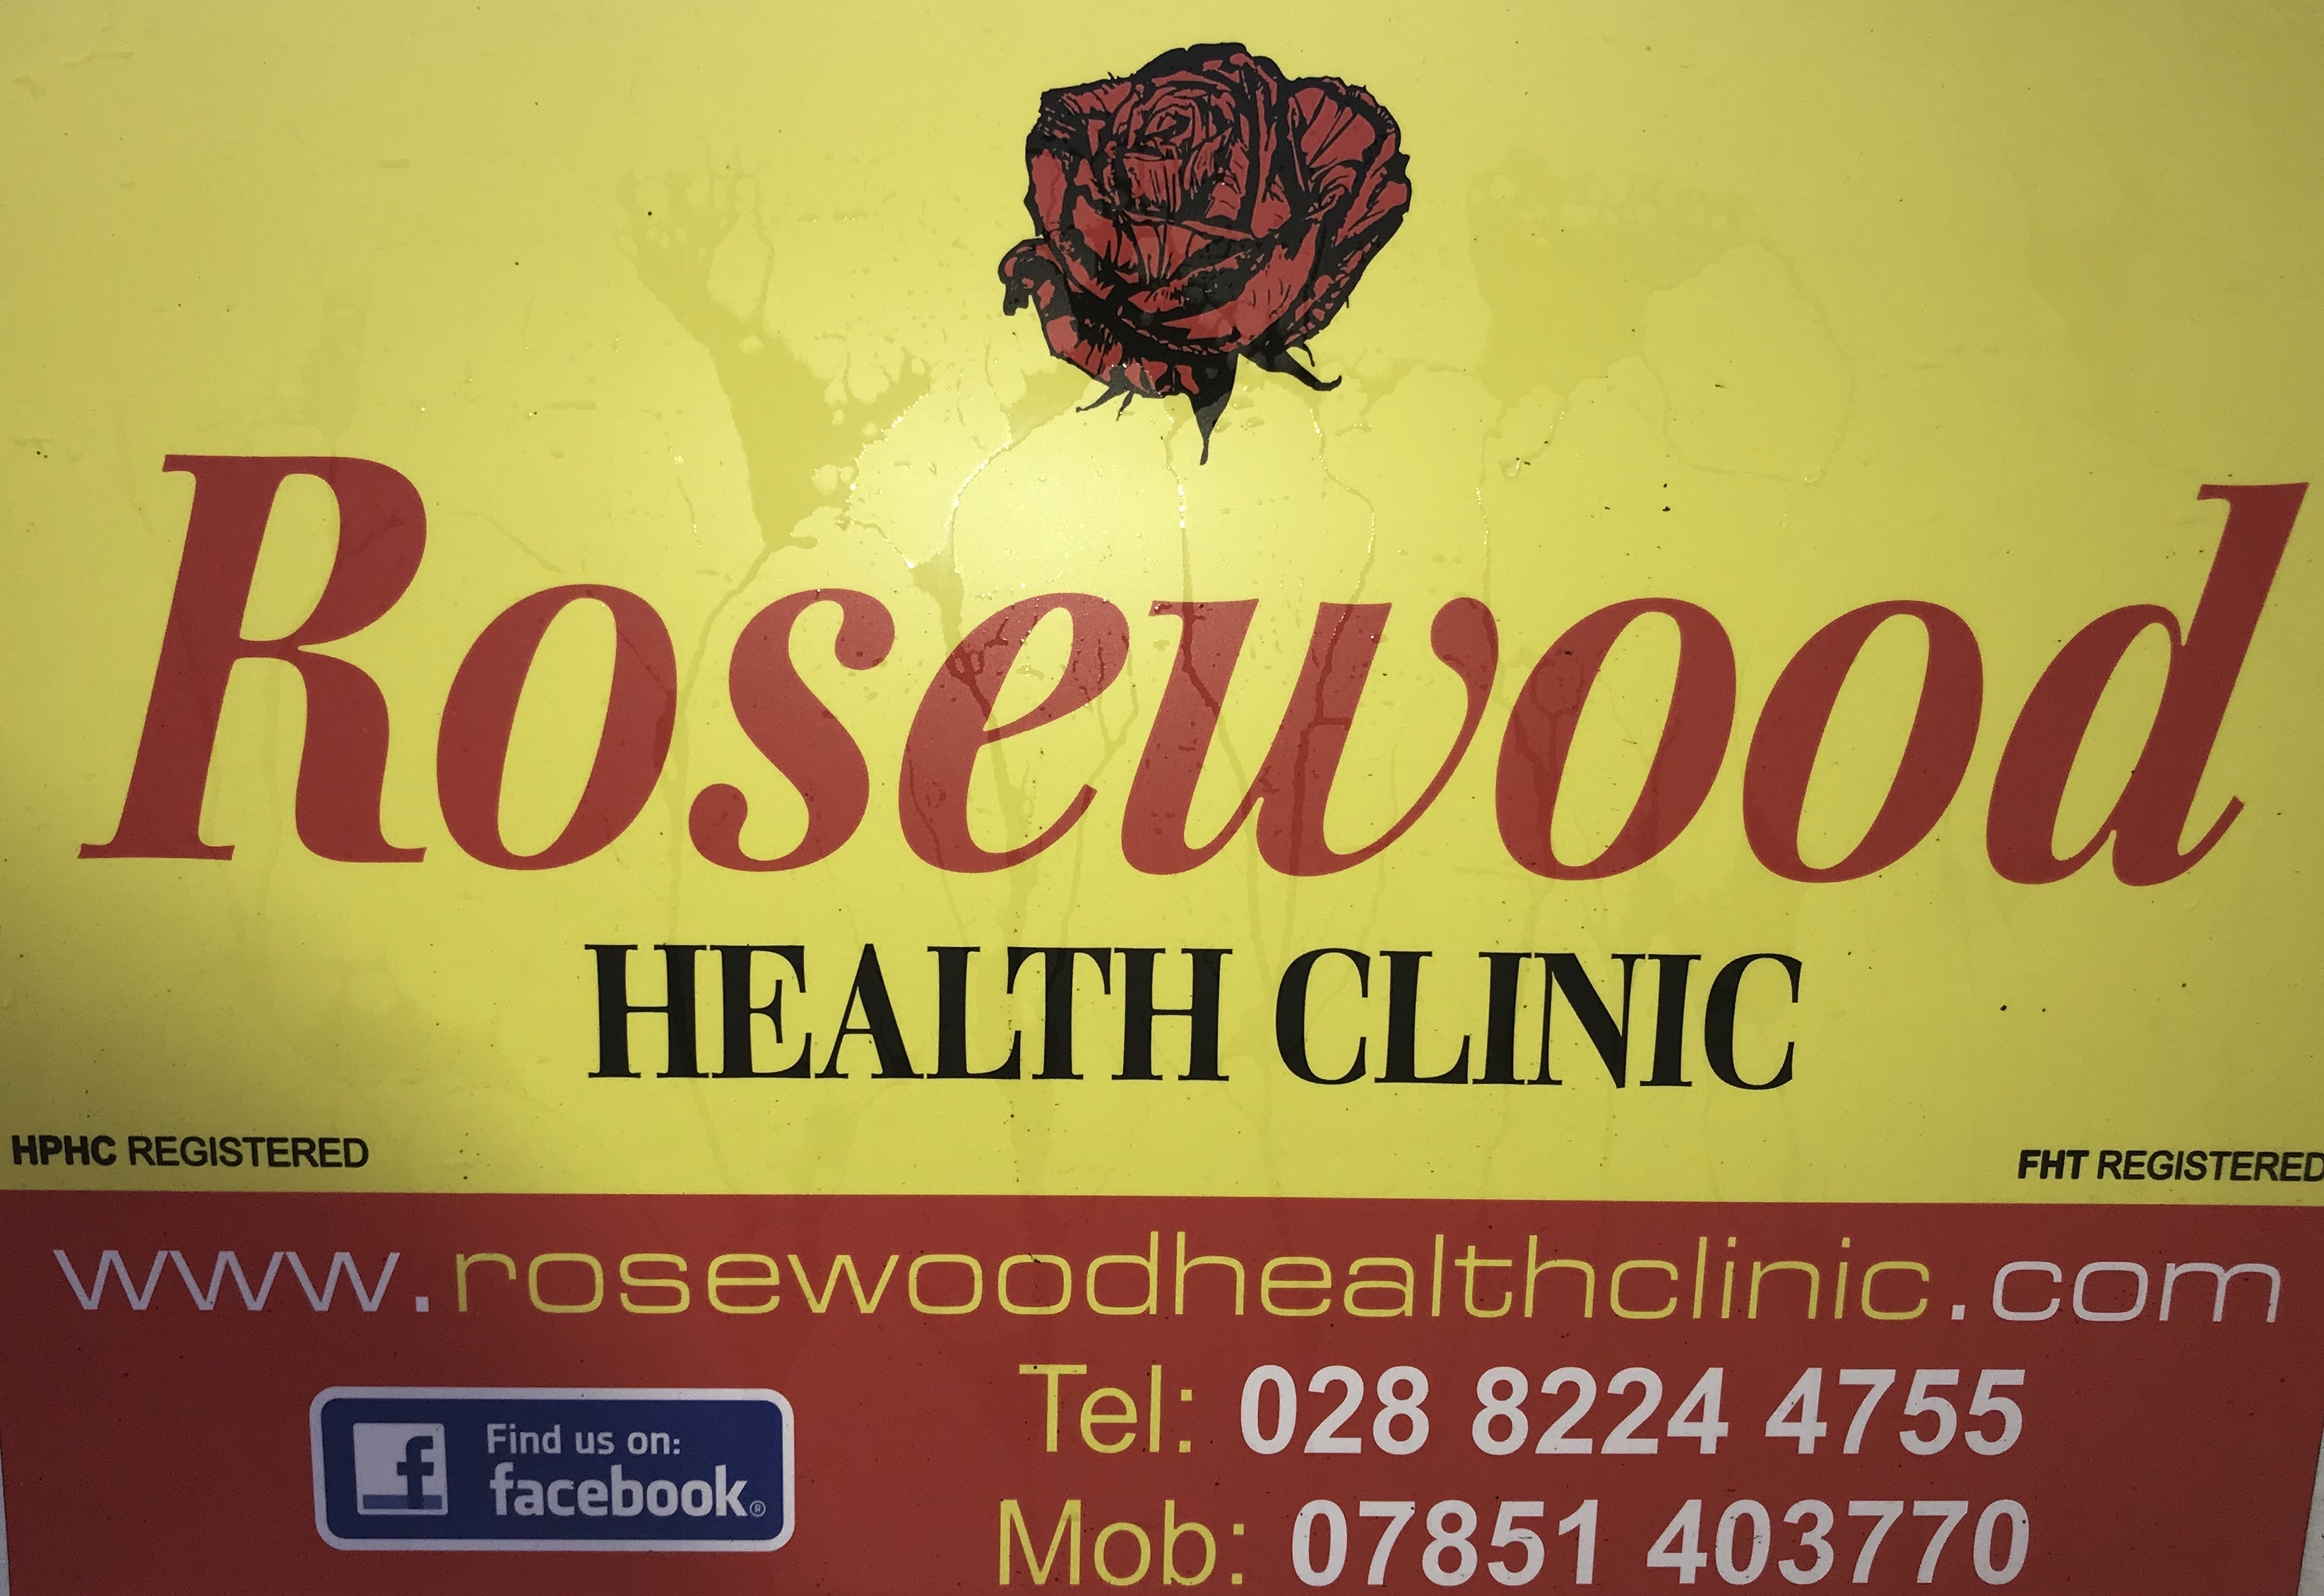 Business Profile: Rosewood Health Clinic